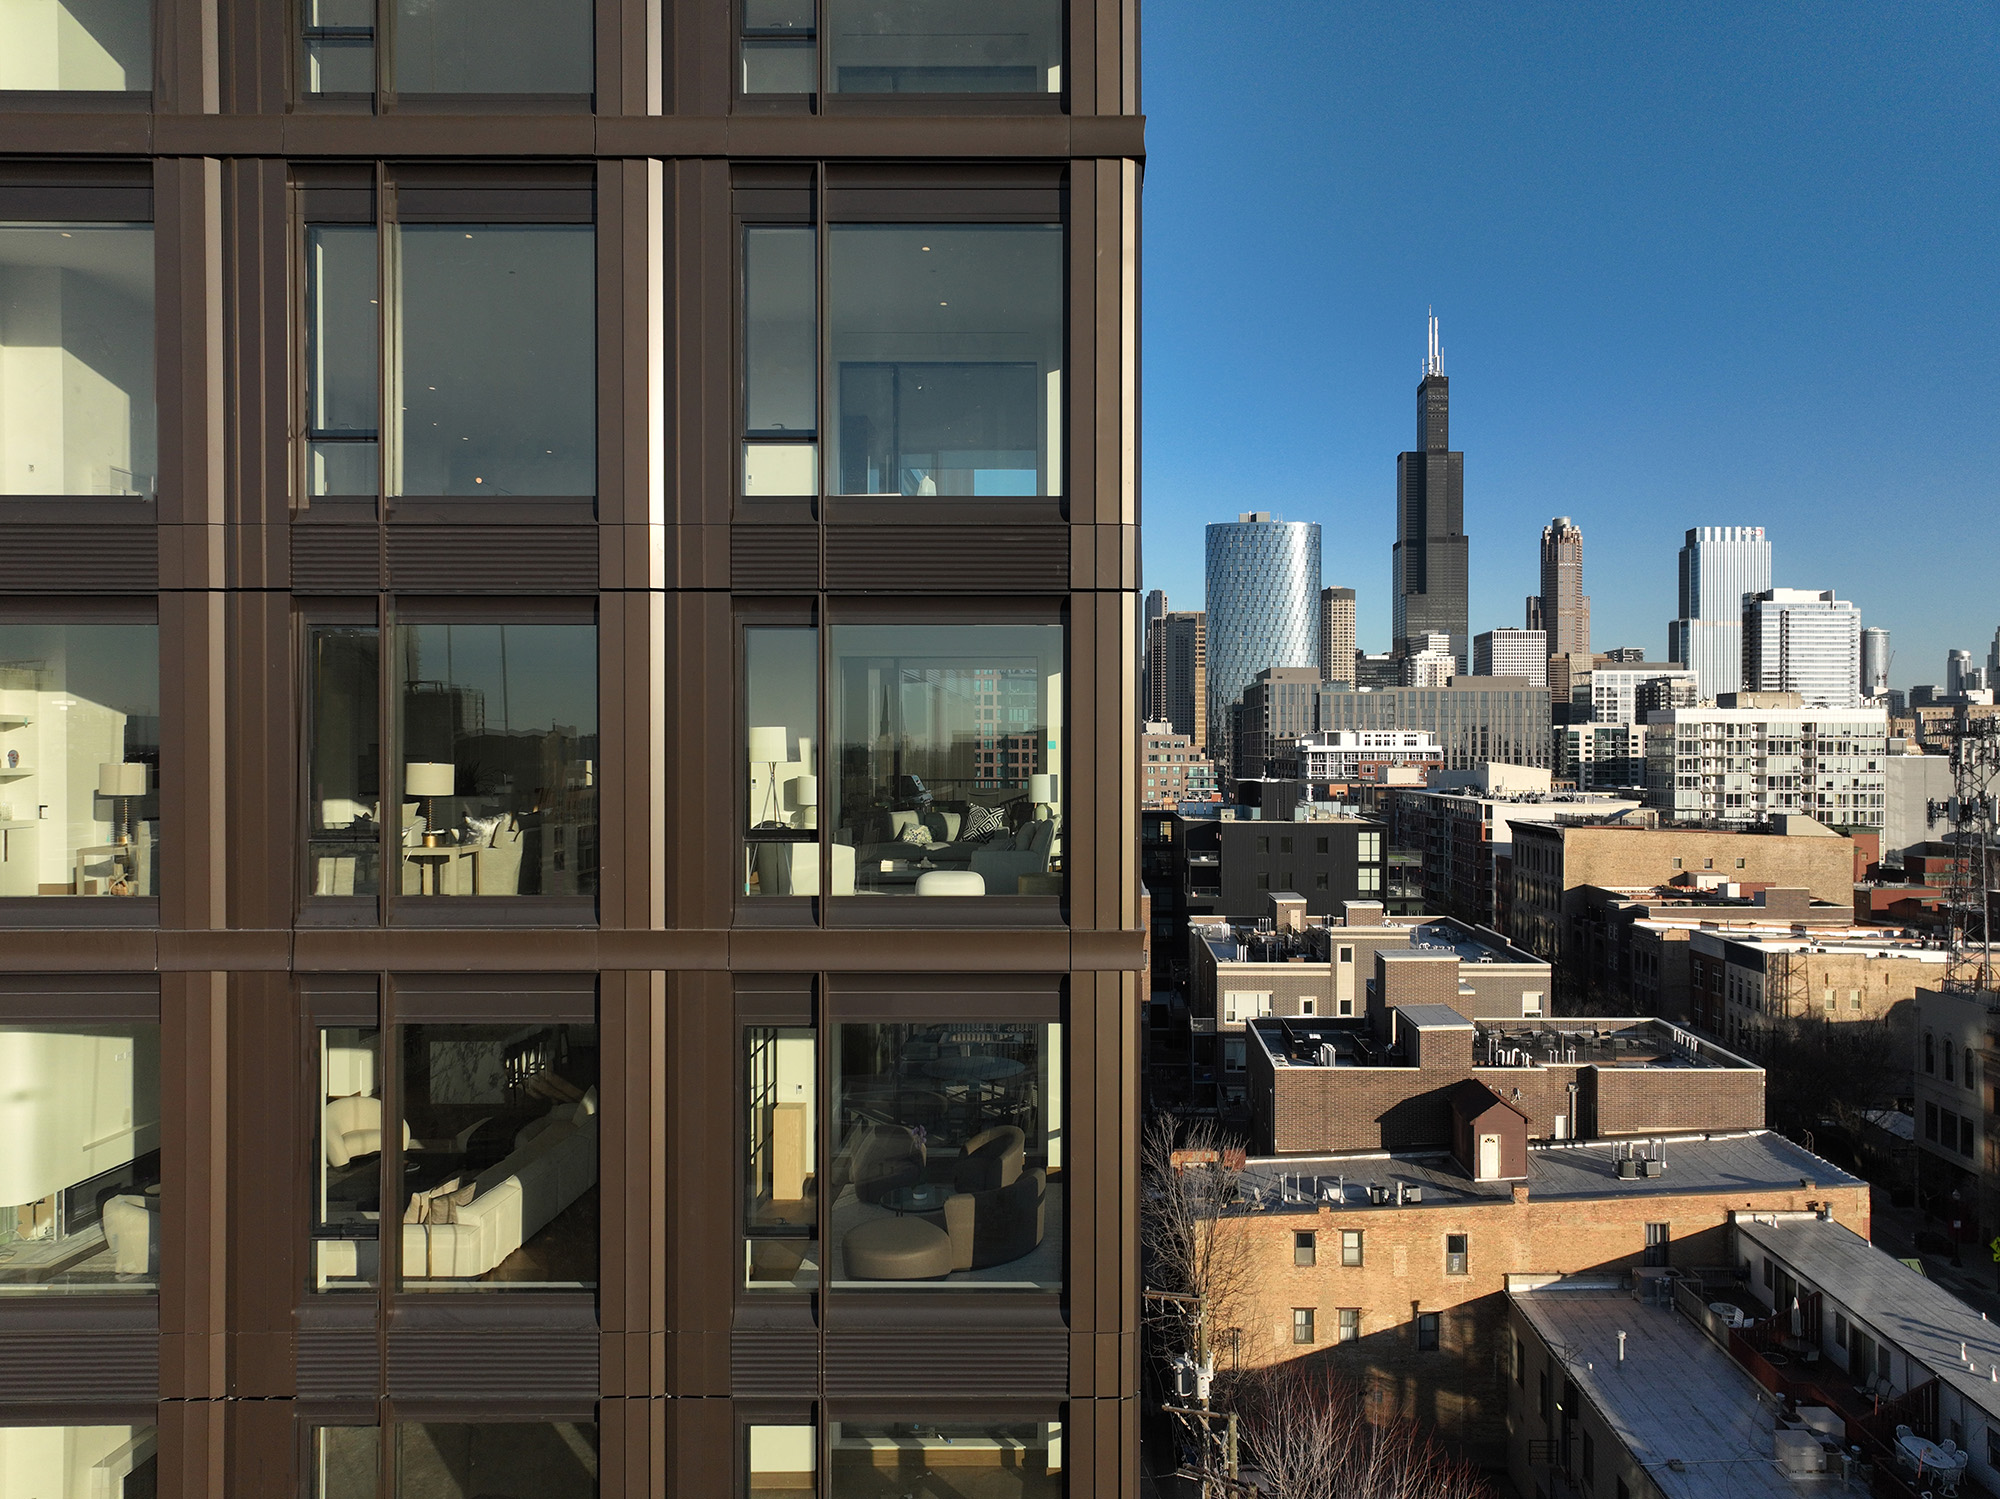 large window openings offer framed views of the surrounding cityscape